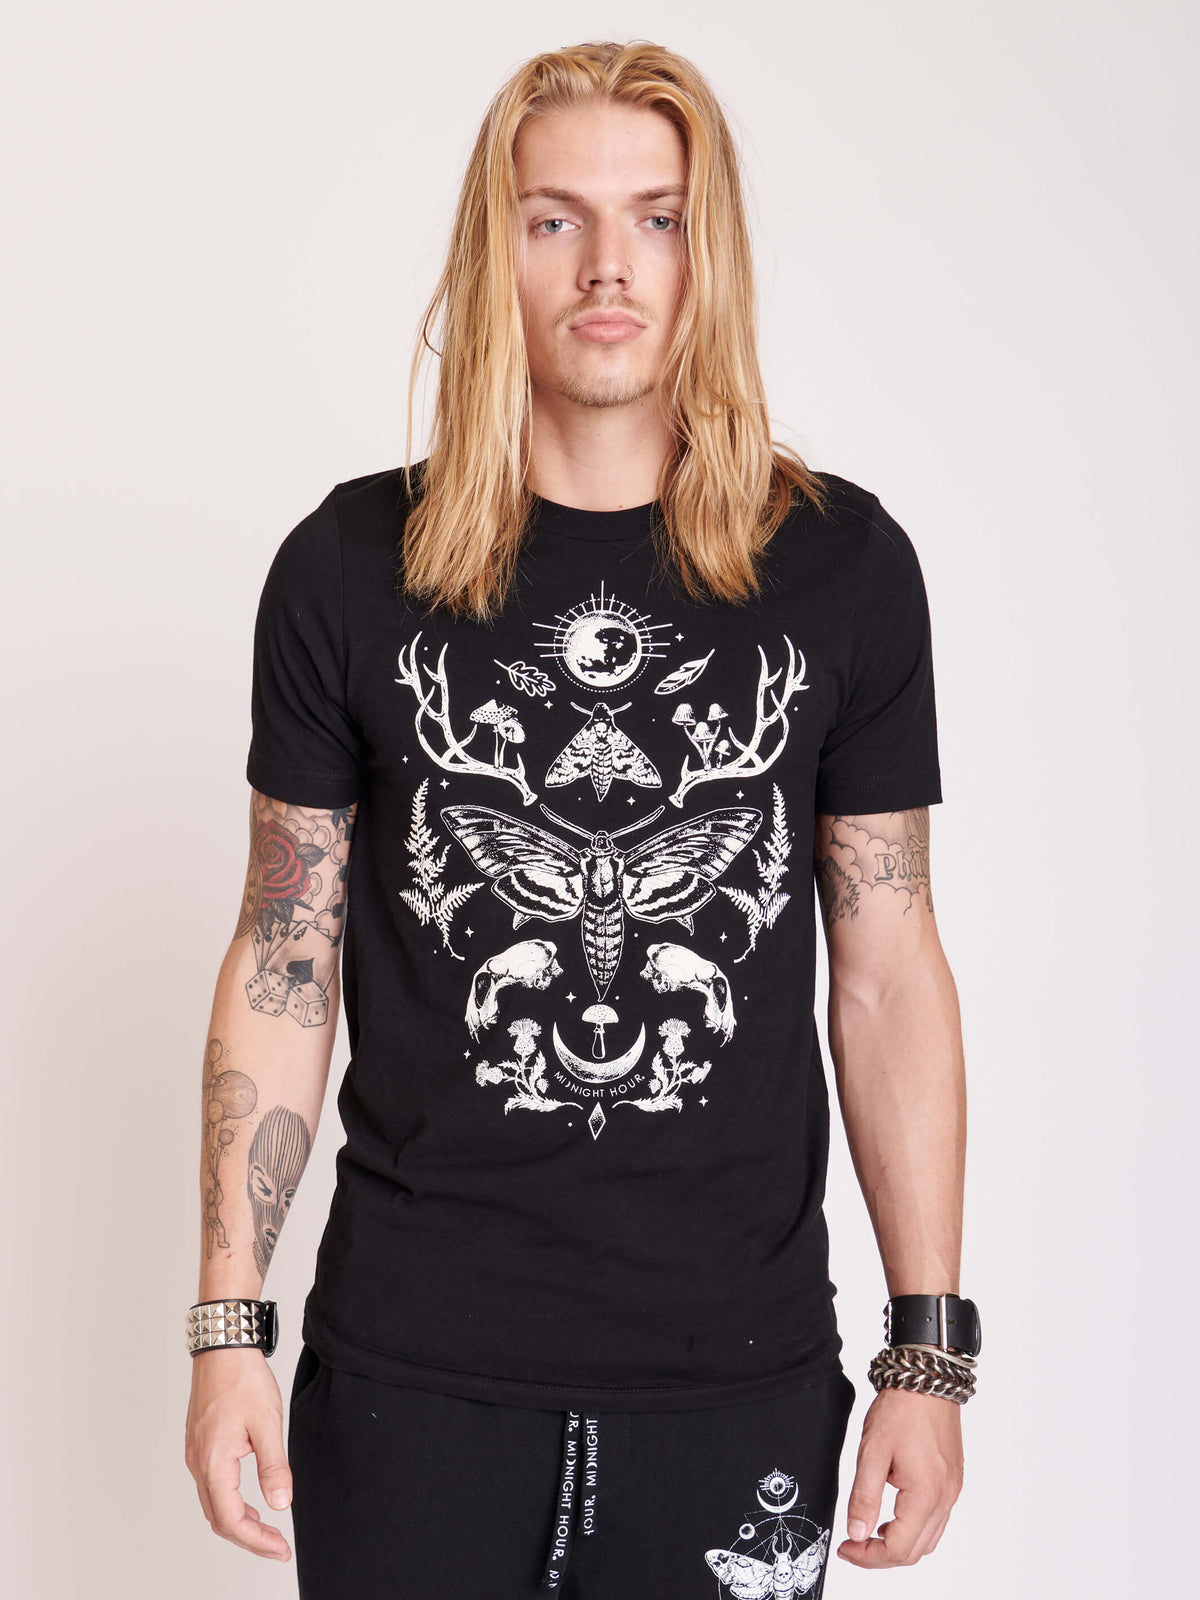 Conjure up the spirits in this soft forest witch 100% cotton t-shirt. witchy, Goth fashion, alt fashion, goth clothing, goth top , witchy clothing, gothic fashion, dark aesthetic.